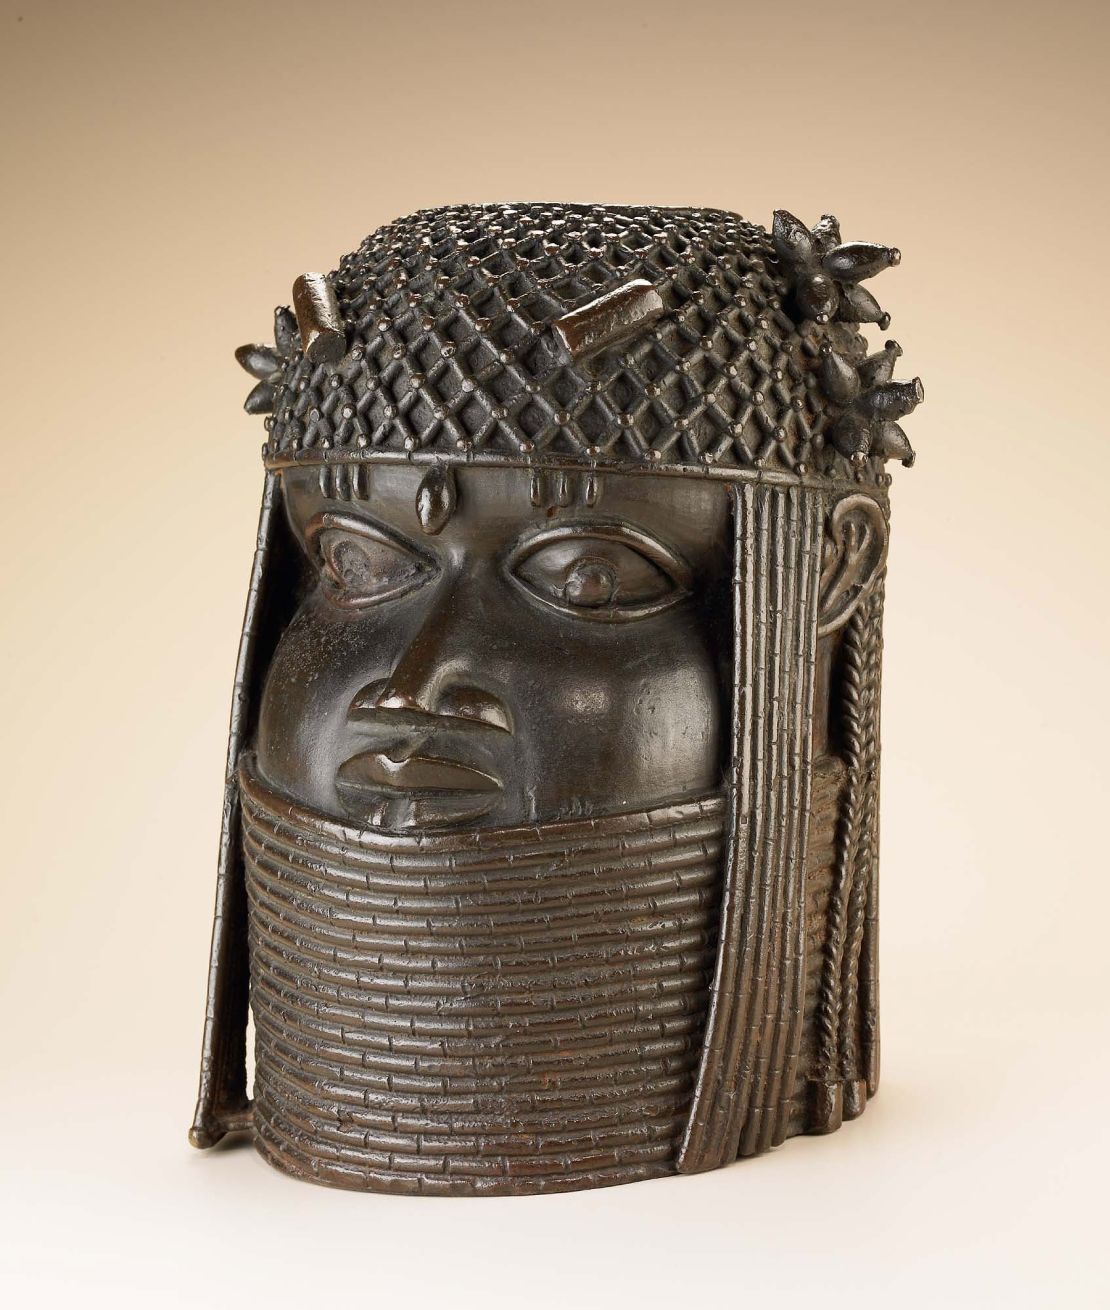 Benin objects are in the collections of more than 160 museums worldwide.